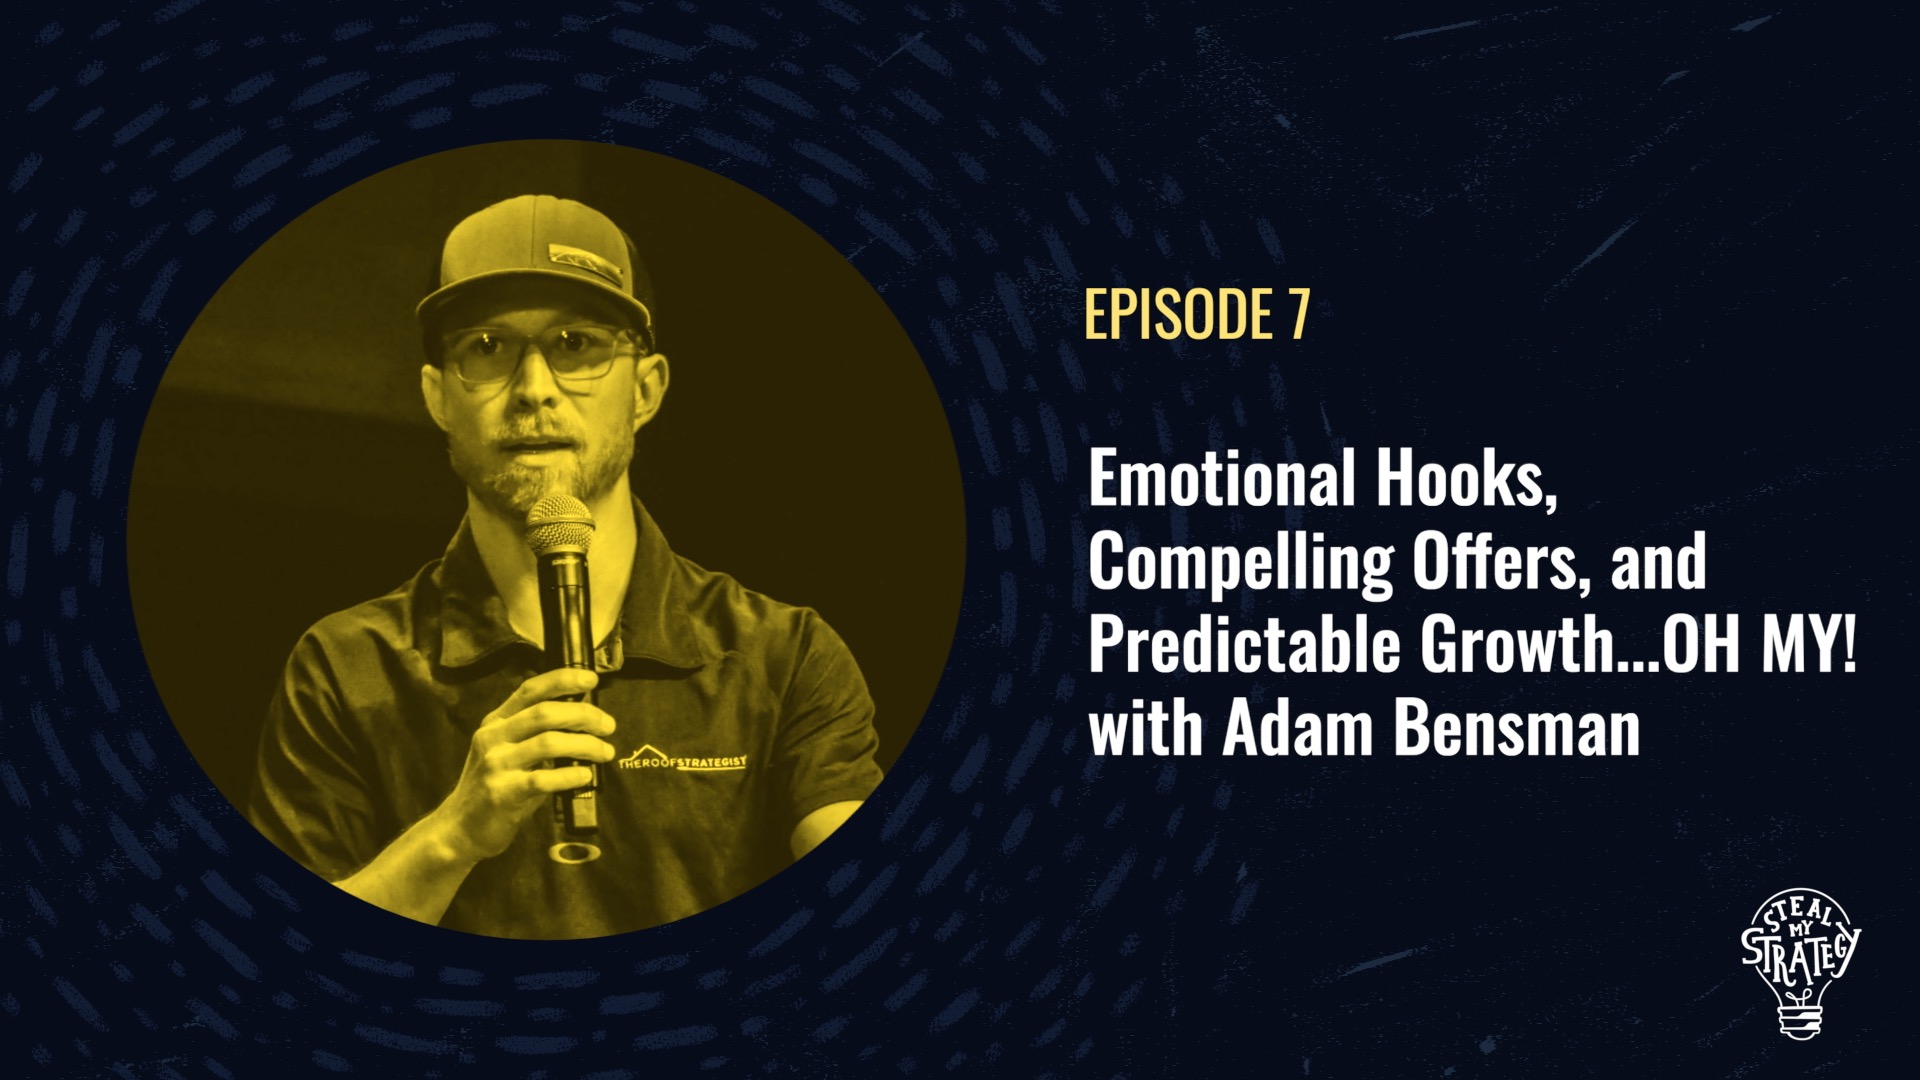 Steal My Strategy: Emotional Hooks, Compelling Offers and Predictable Growth… OH MY! with Adam Bensman